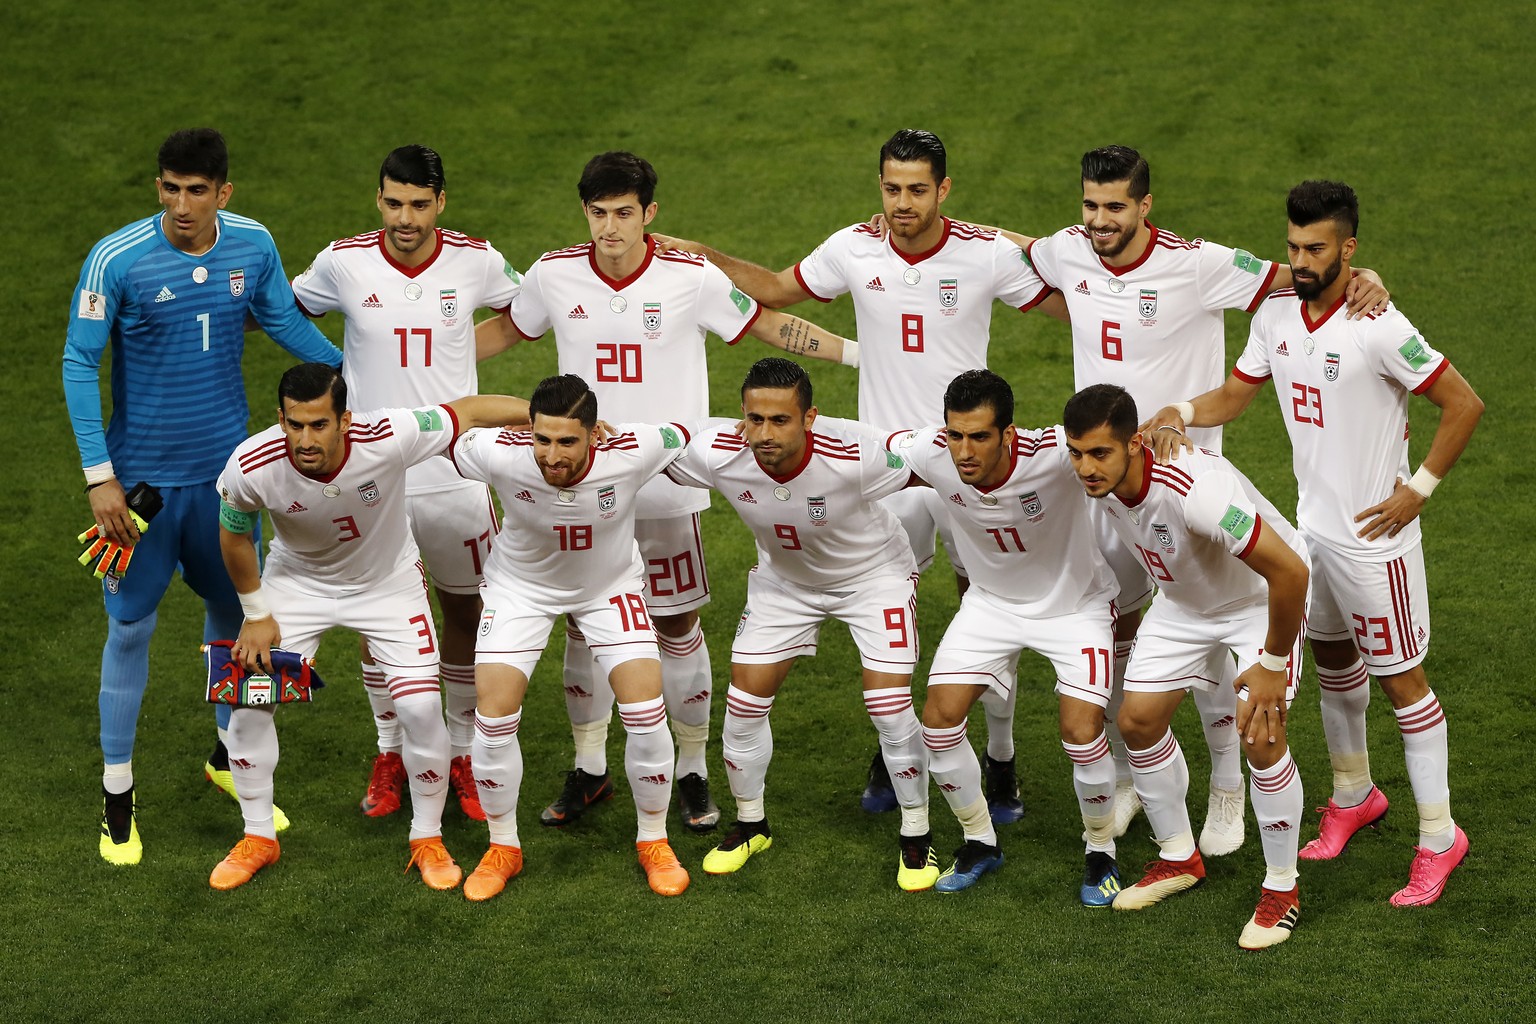 ARCHIVBILD ZUR VORSCHAU AUF DIE GRUPPE B --- Iran national soccer team players pose prior to the start of the group B match between Iran and Portugal at the 2018 soccer World Cup at the Mordovia Arena ...